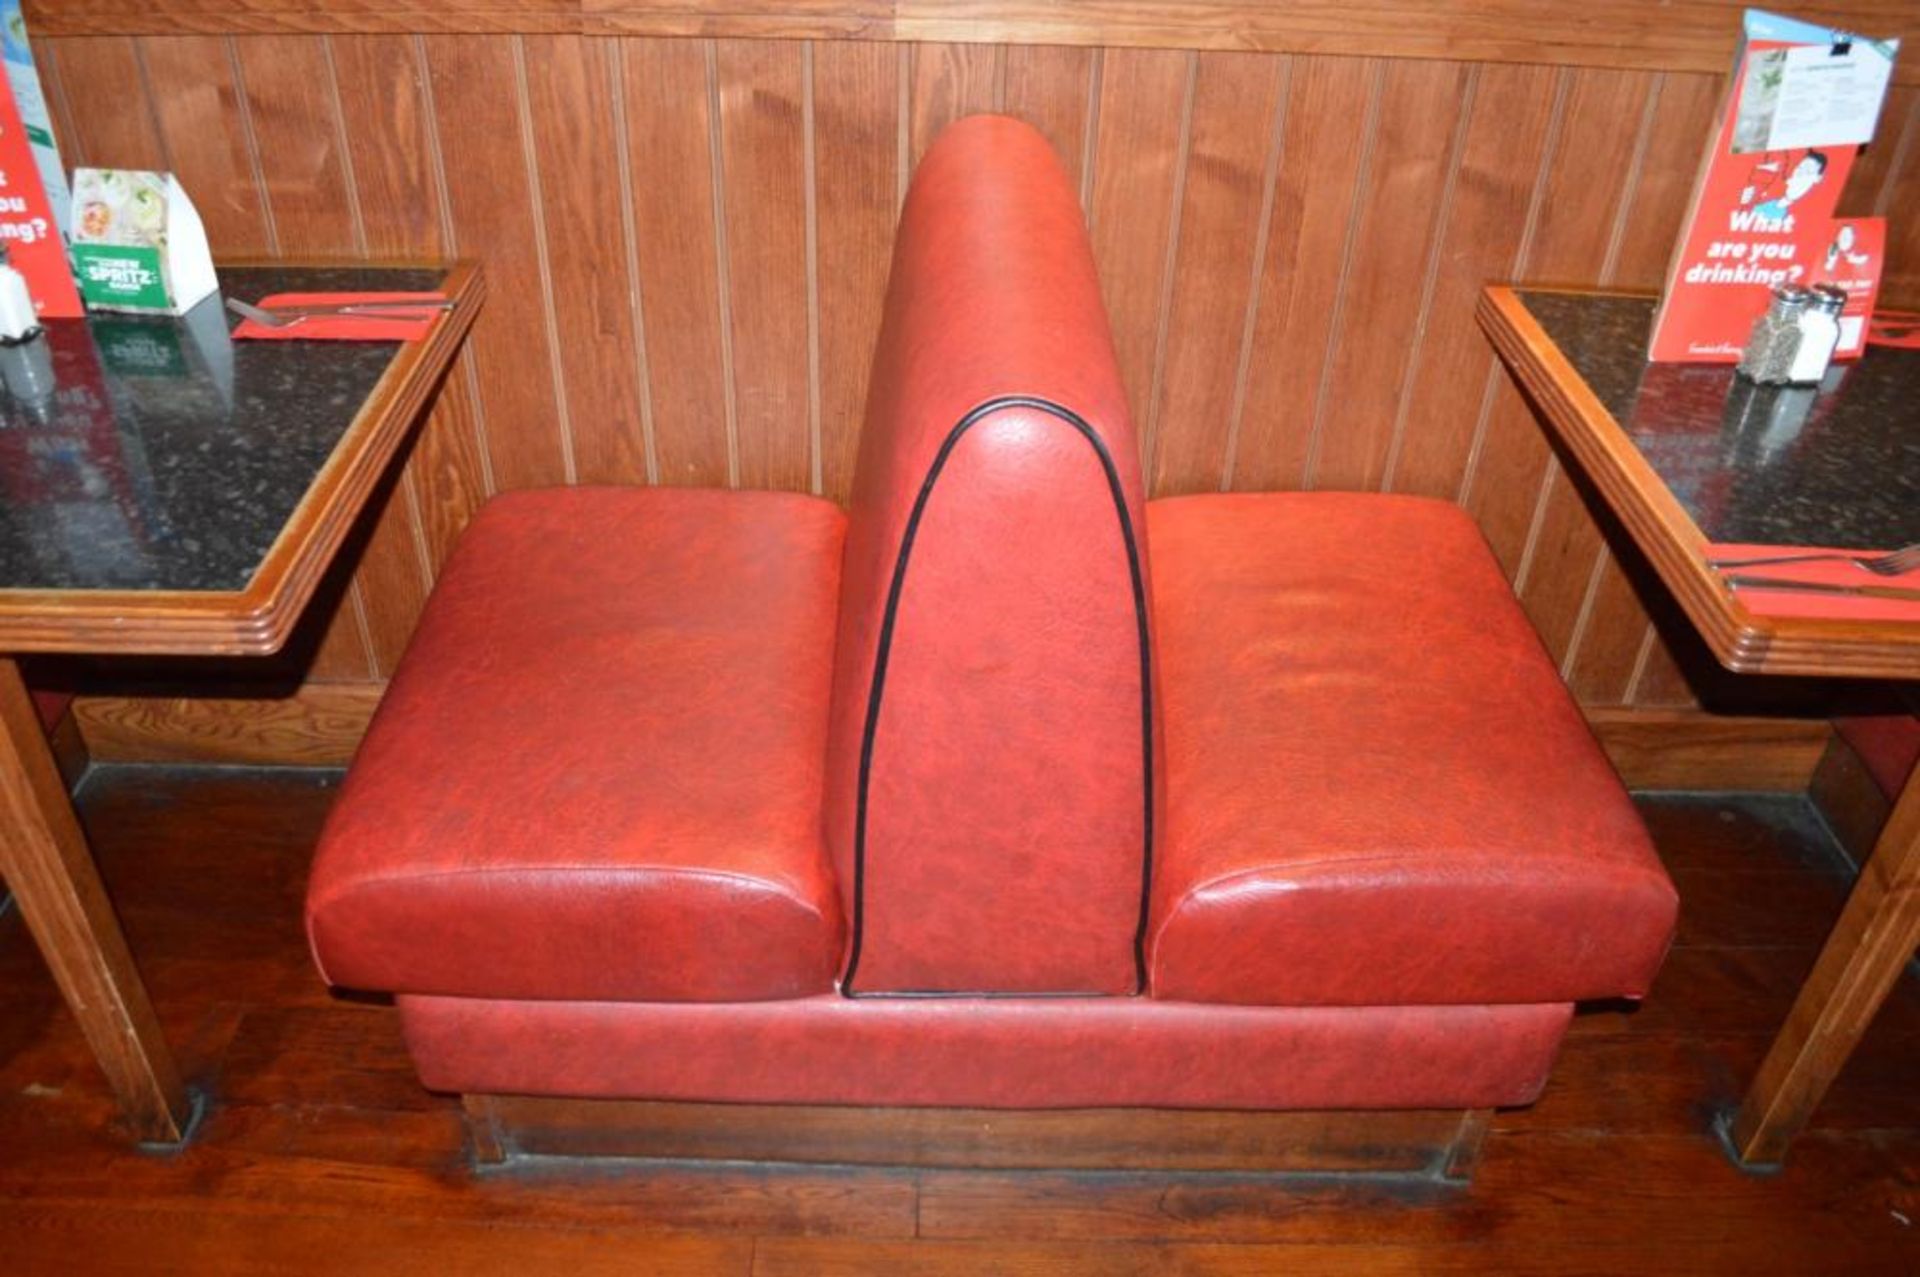 1 x Selection of Cosy Bespoke Seating Booths in a 1950's Retro American Diner Design With Dining Tab - Image 6 of 30